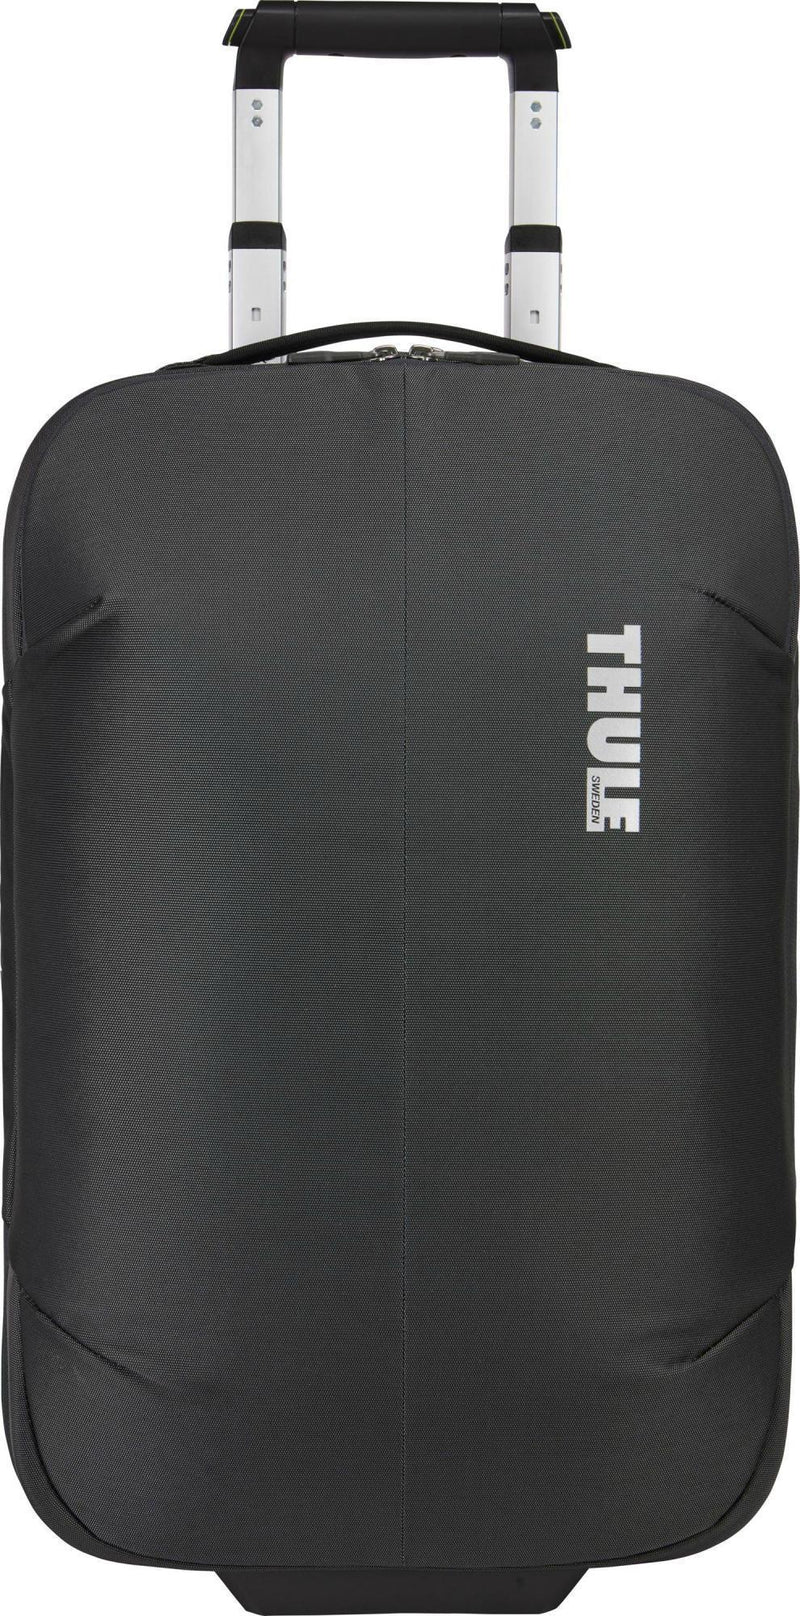 Thule Luggage Subterra Carry-On Luggage 55cm/22